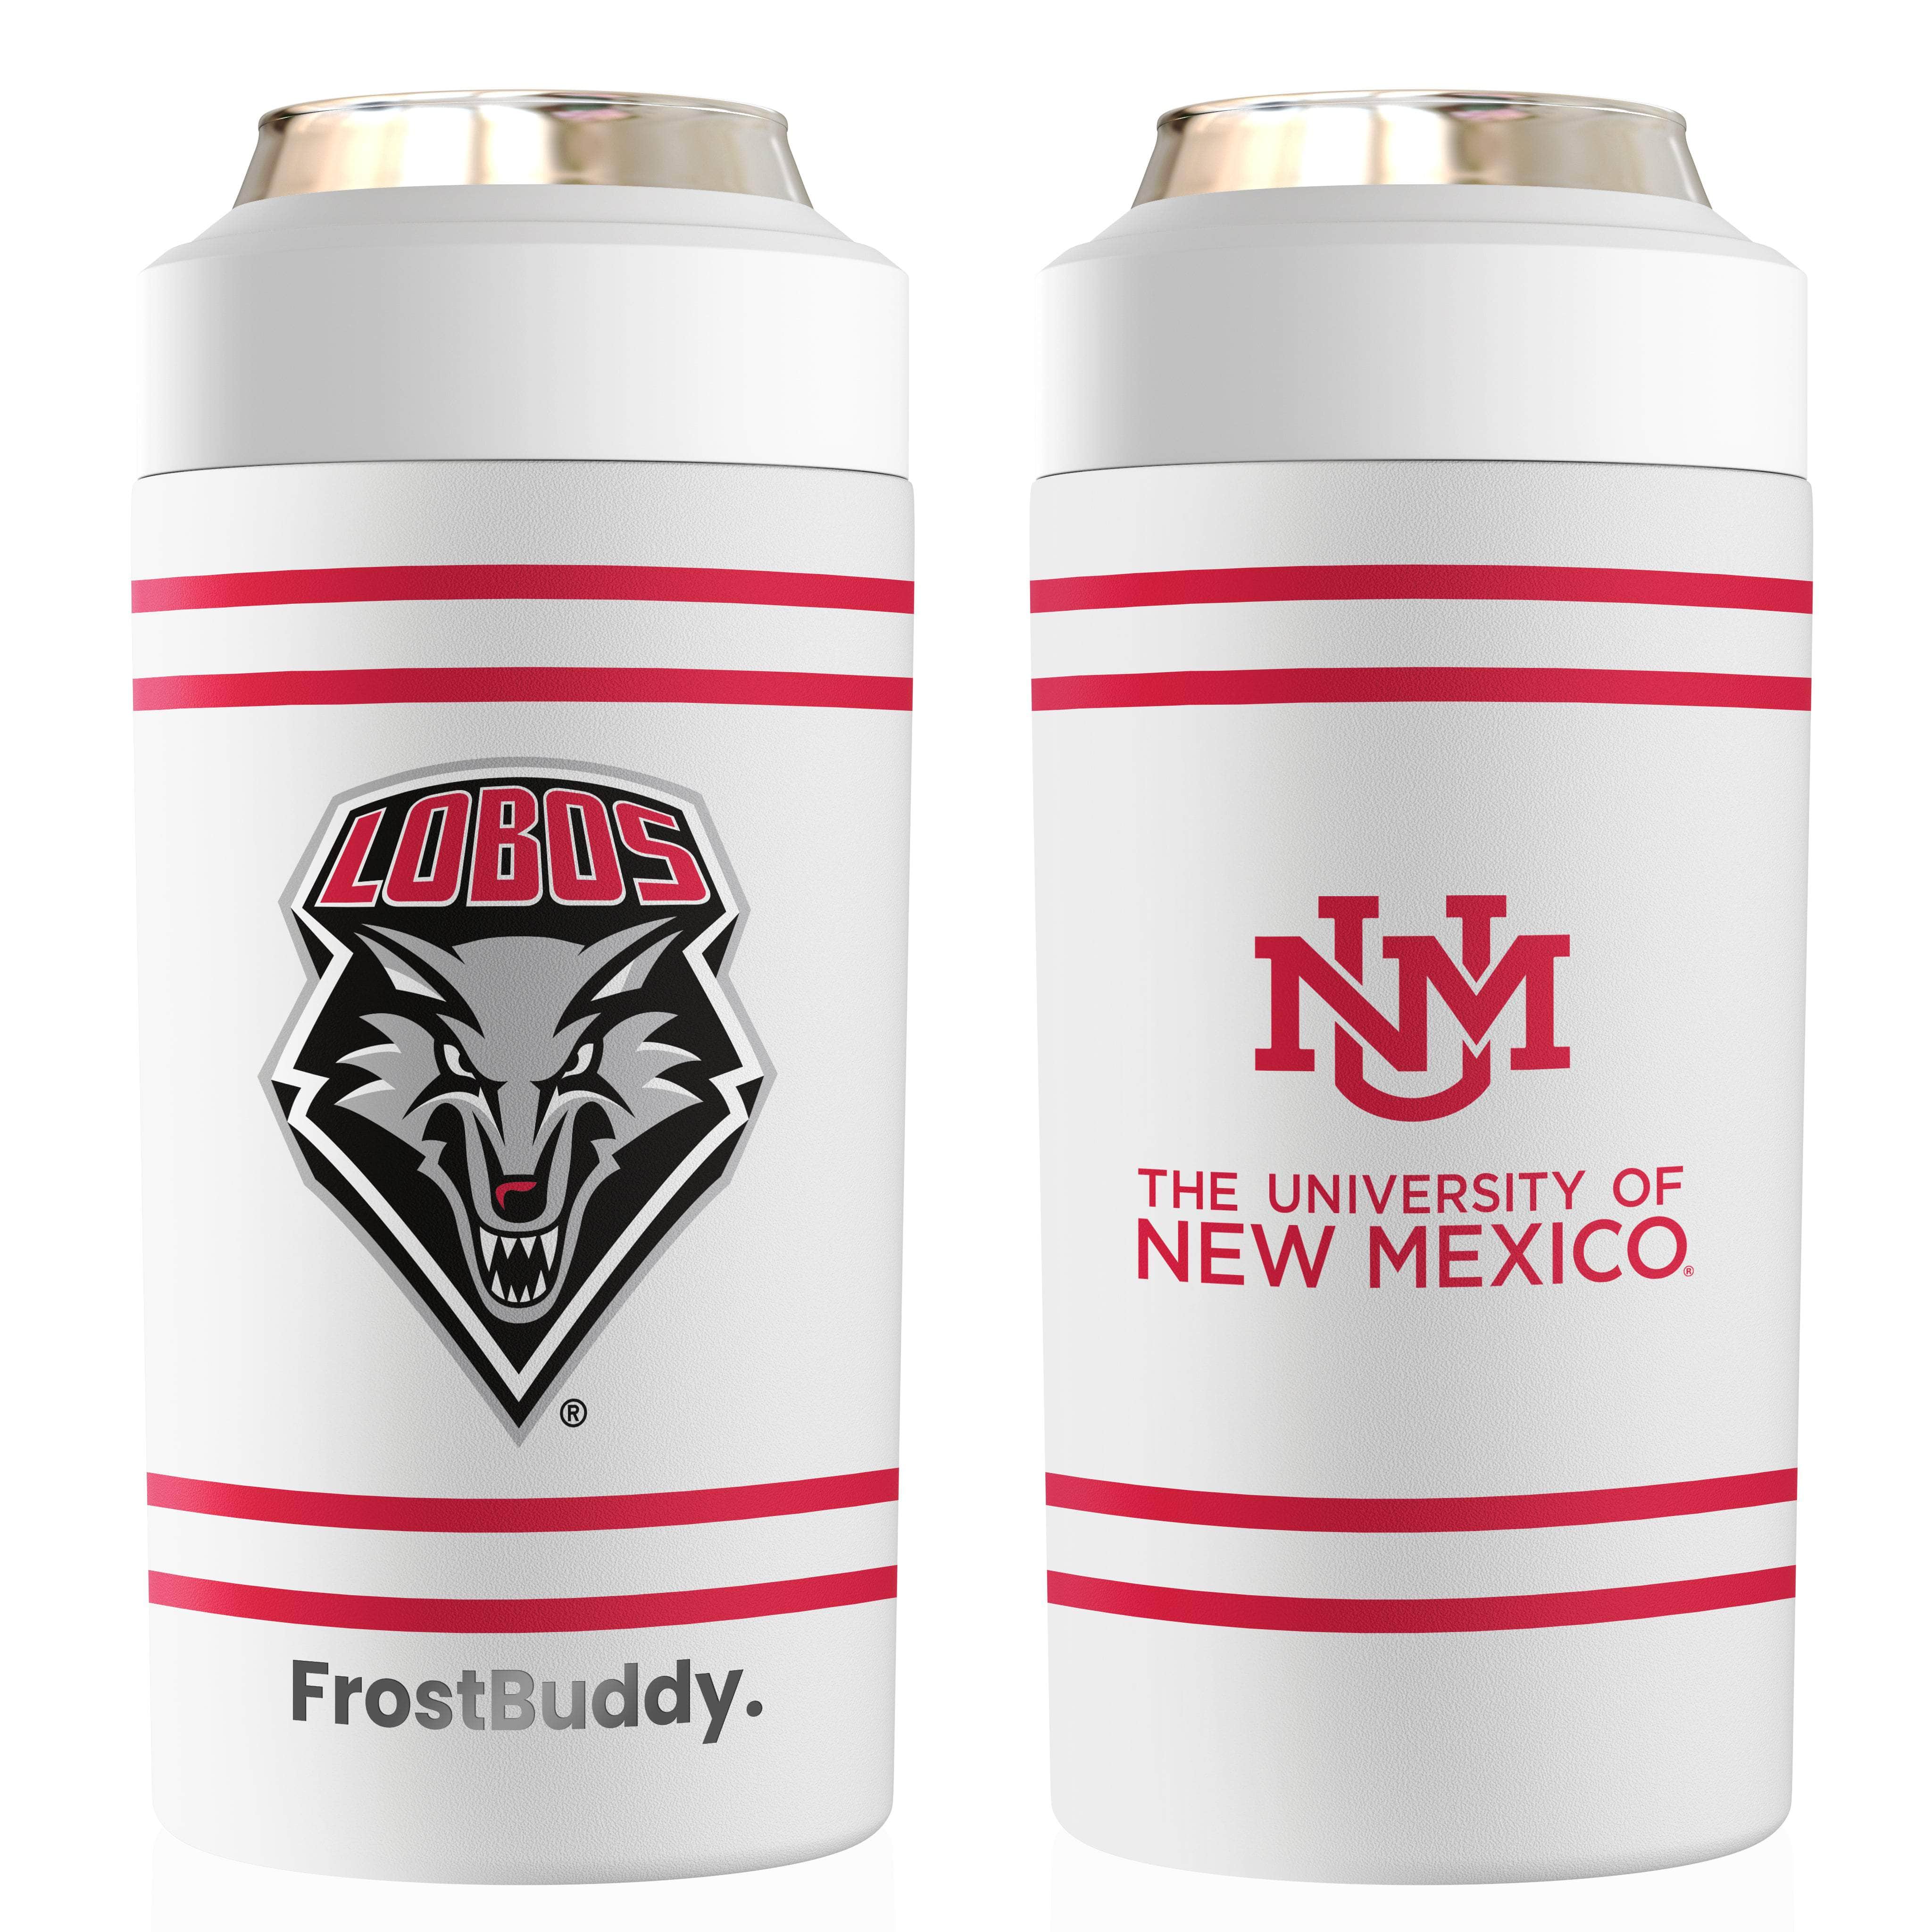 Universal Buddy | University of New Mexico - Holds 12oz Cans, Slim Cans, Bottles, 16oz Cans & Bottles - Keep Your Drink Cold for 12+ Hours | Frost